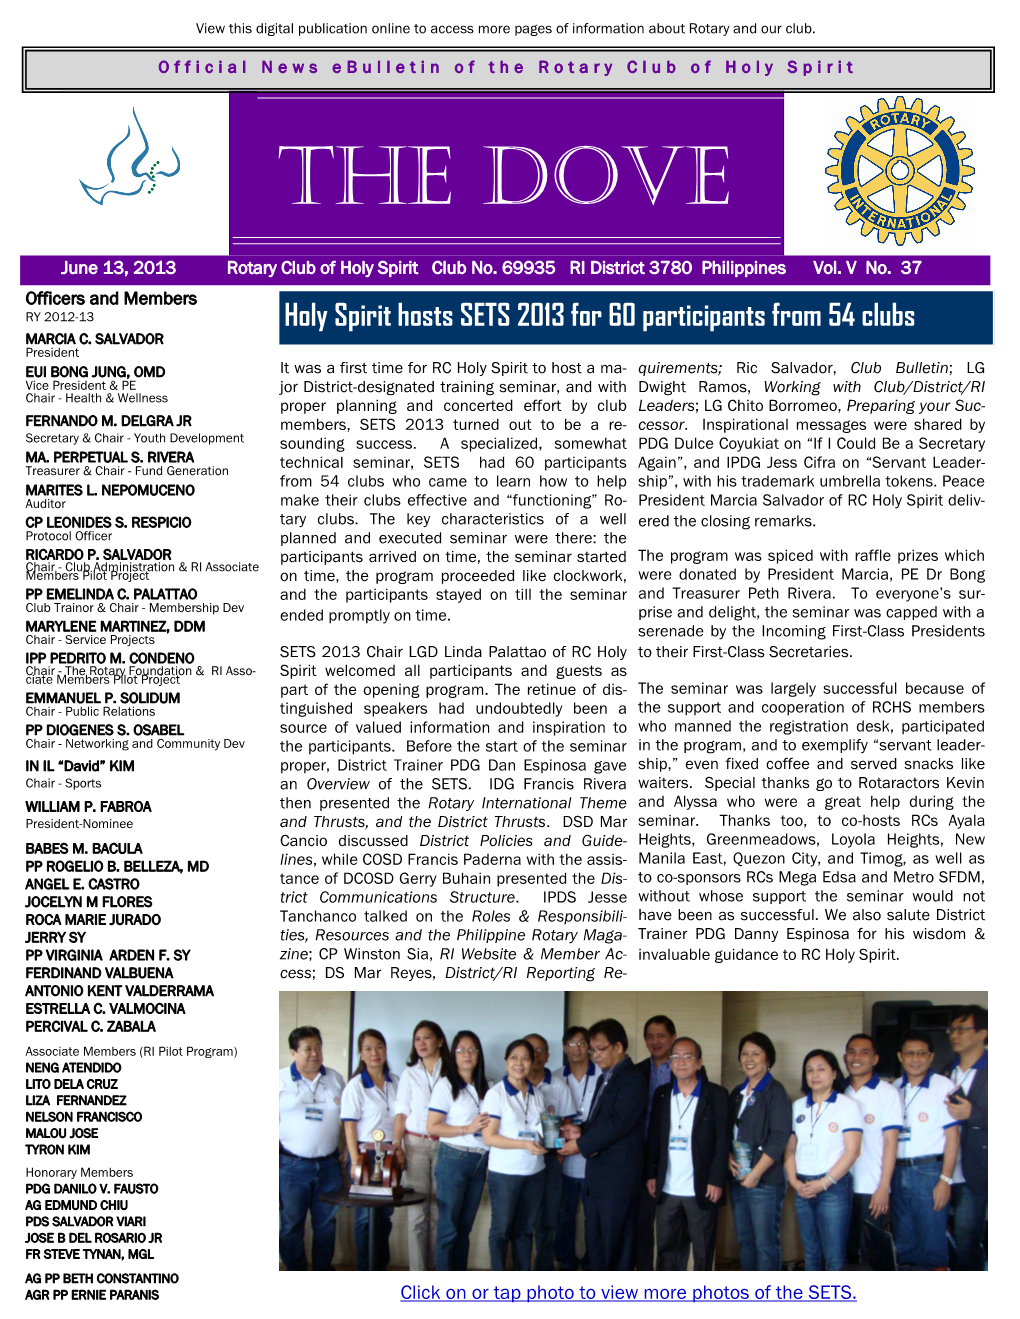 Rotary Club of Holy Spirit the Dove